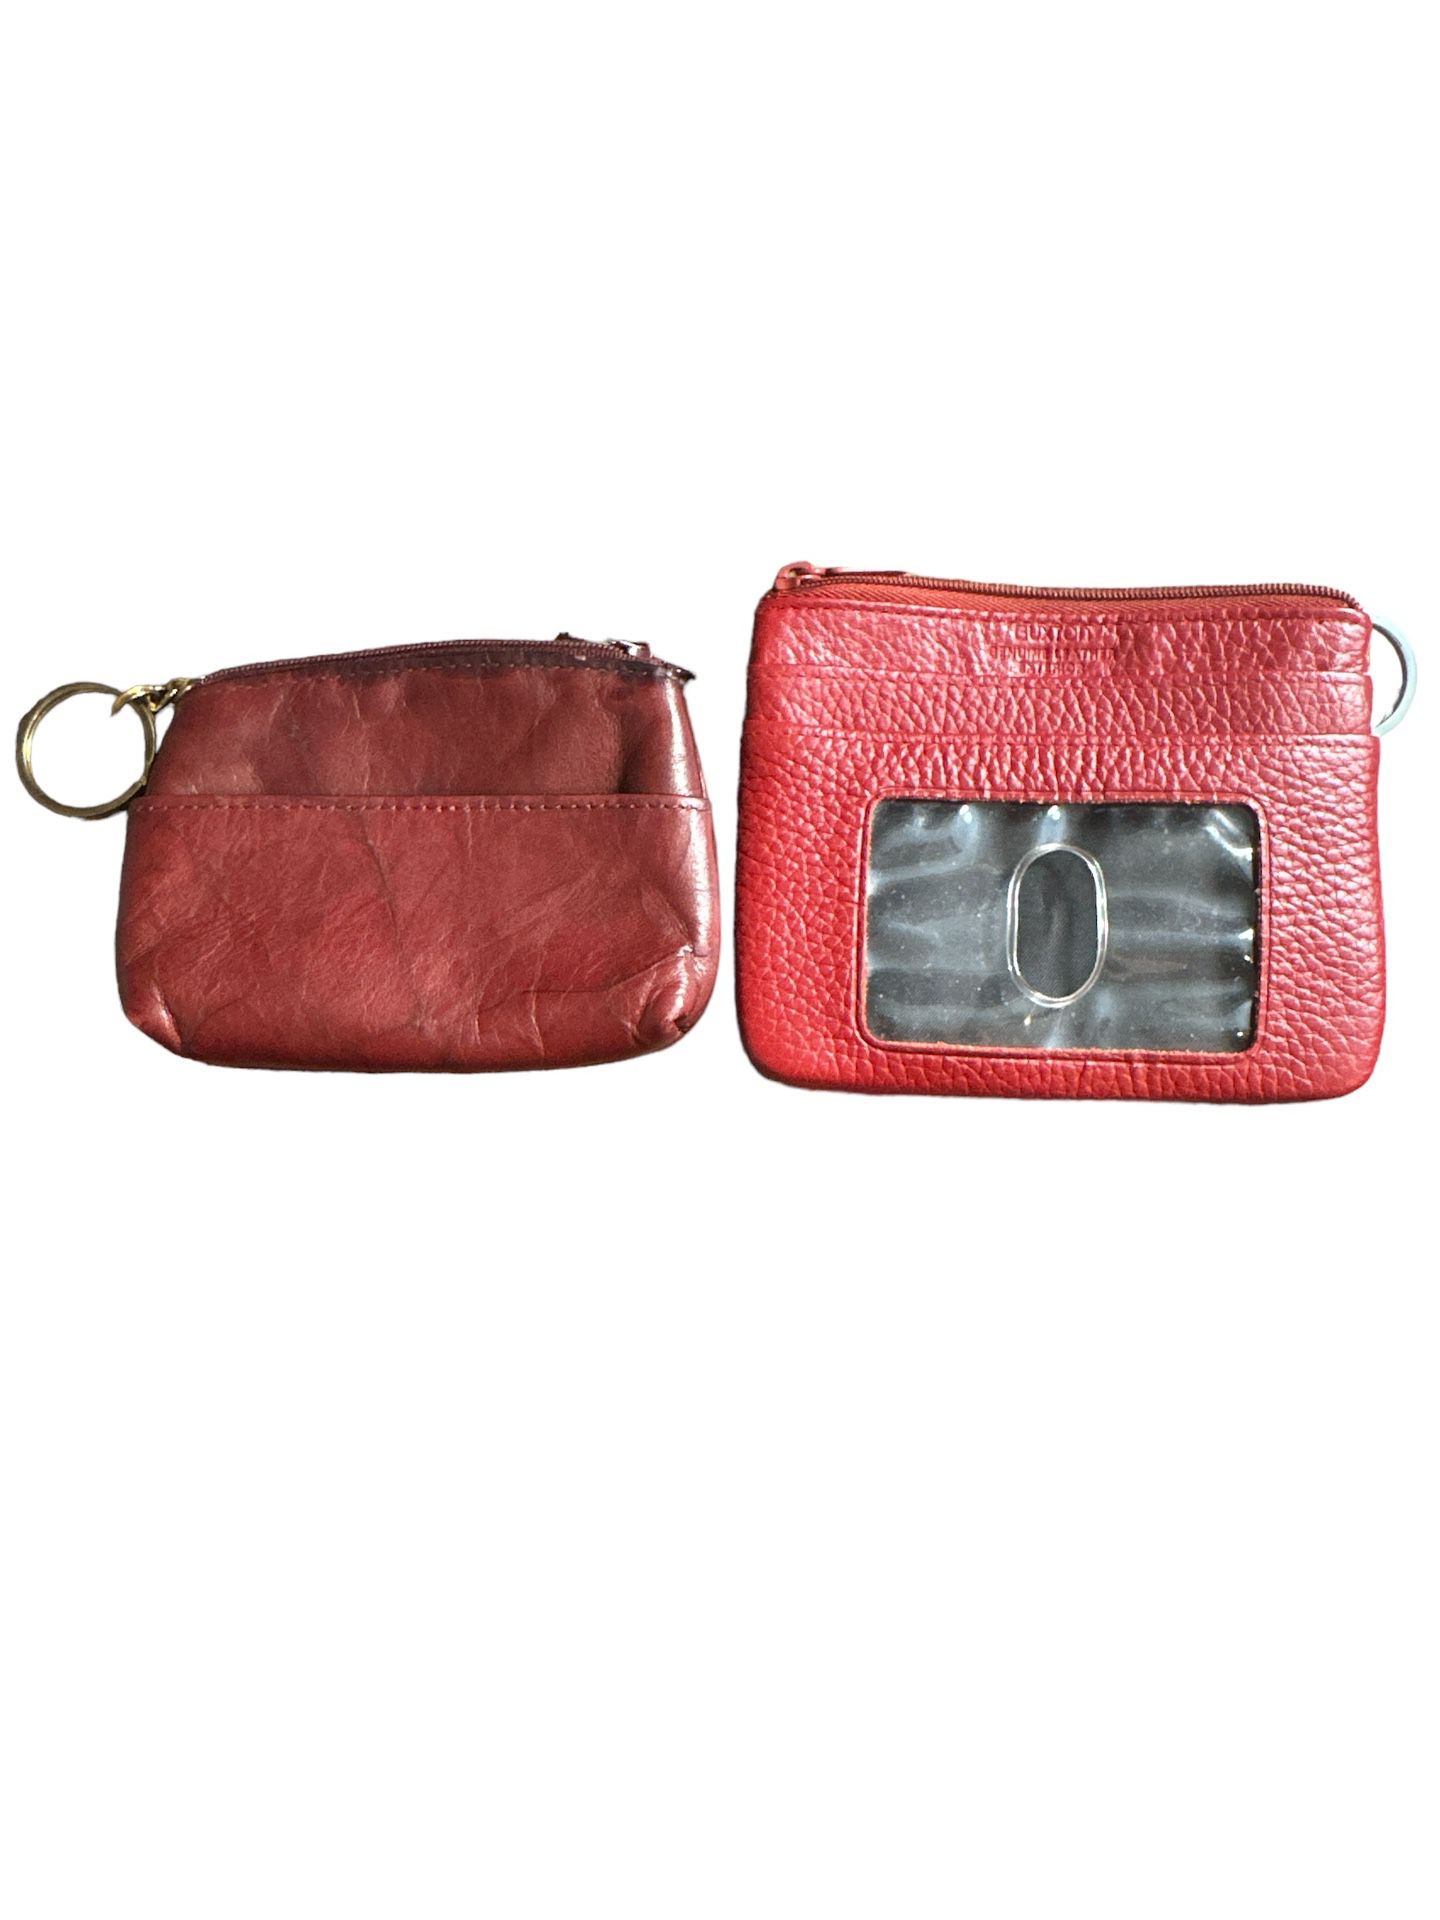 Leather wallet 2 one is a buxton and one genuine leather key chain wallet’s approximately 5”x5”.   T-180